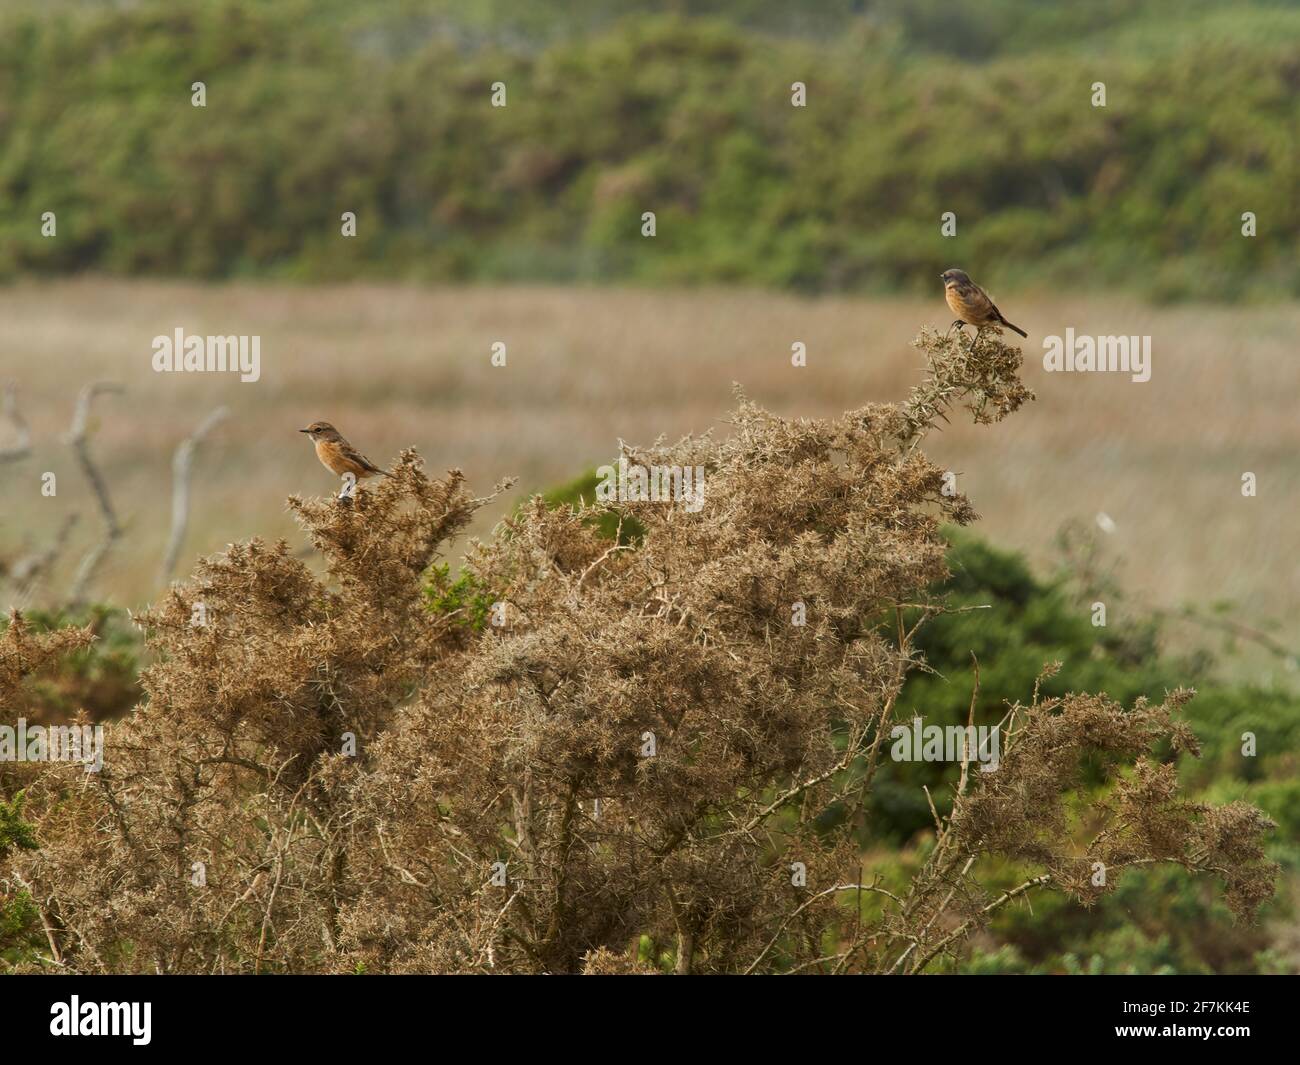 A pair of stonechats perched on a deeply textured gorse bush, against a de-focused background of bushes and golden grasses. Stock Photo